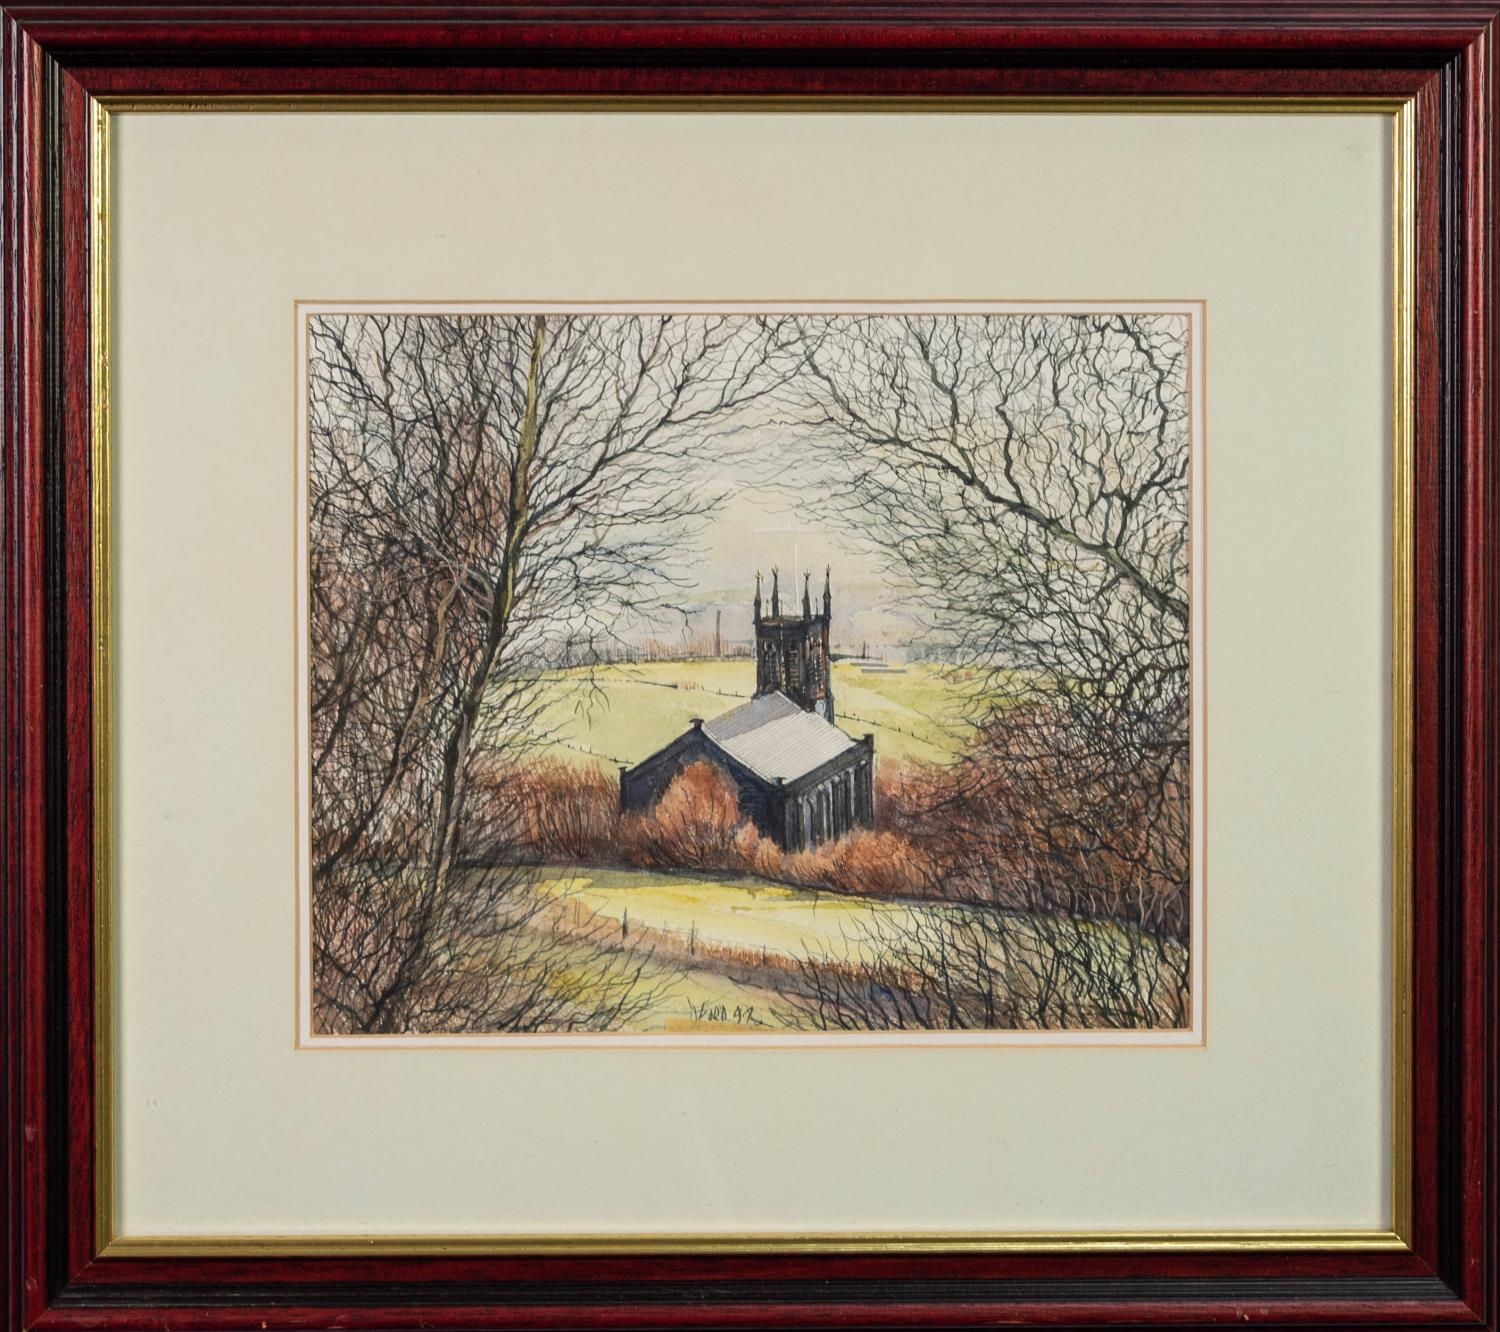 DAVID FORD WATERCOLOUR DRAWING Oldham landscape with church on hill Signed and dated (19)'91 8 3/4in - Image 2 of 2